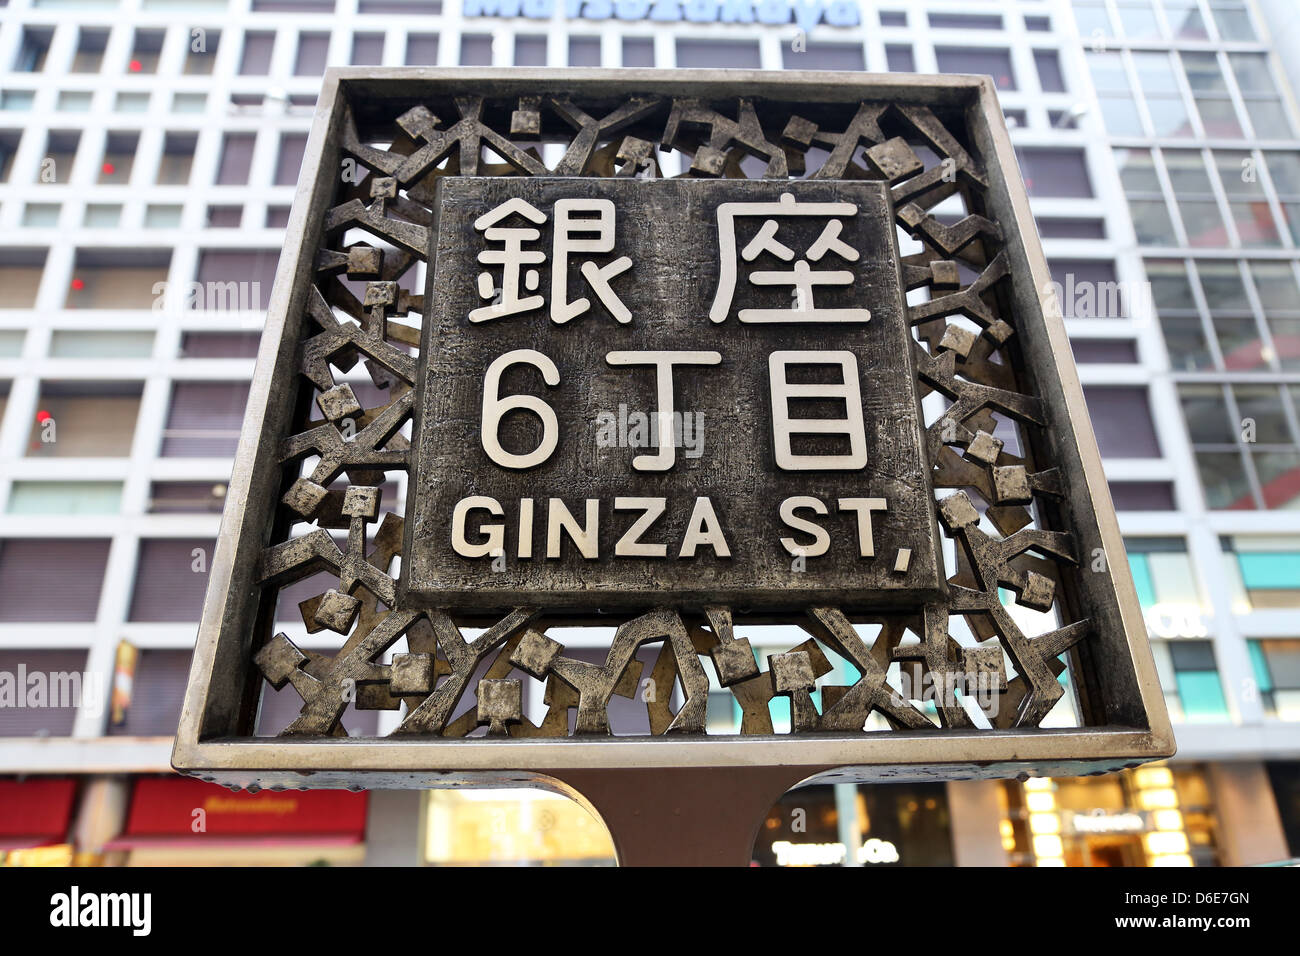 Street sign in Ginza, Tokyo, Japan Stock Photo